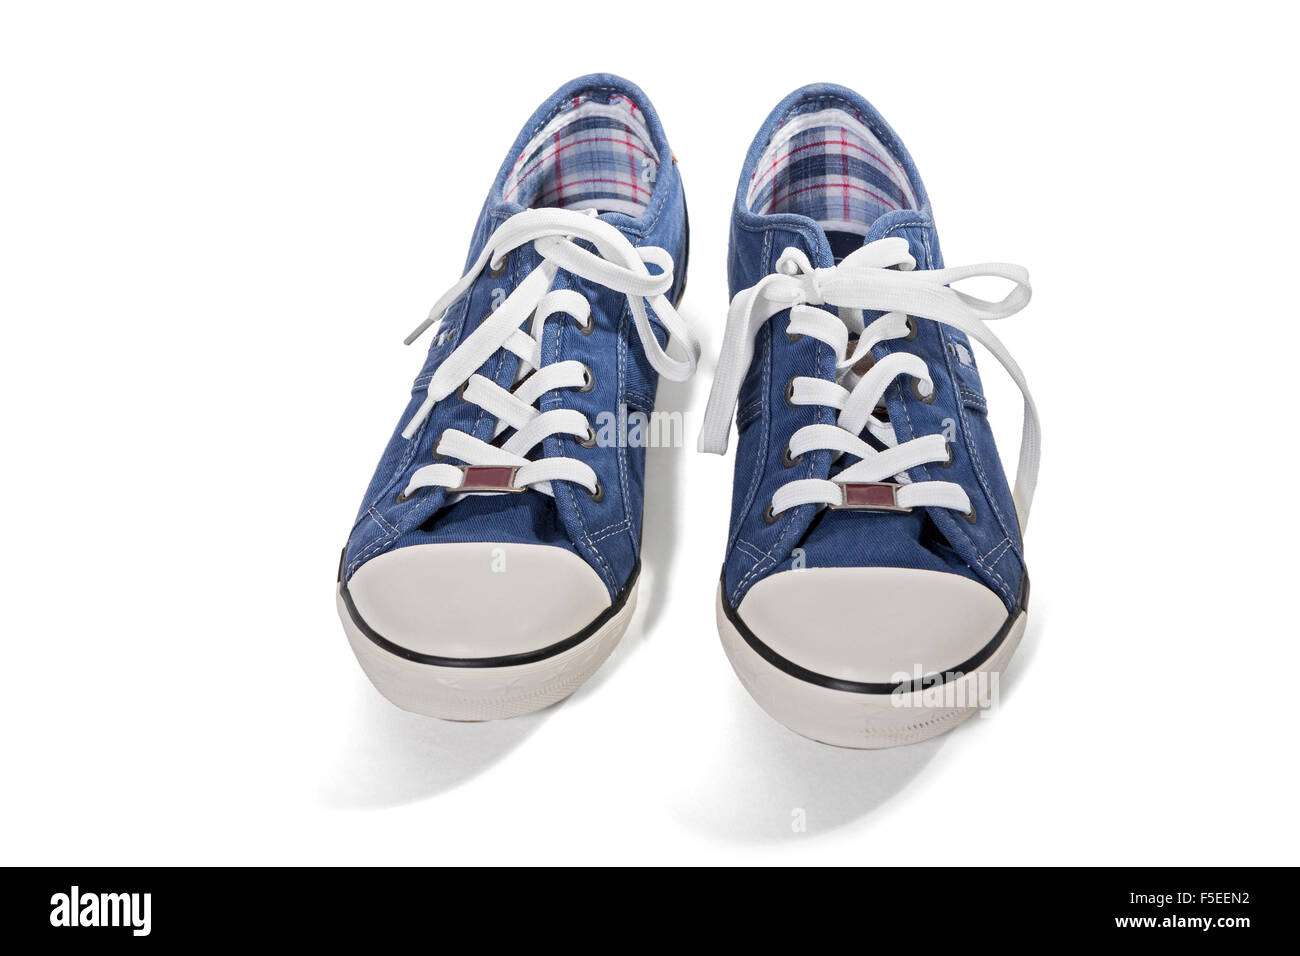 Pair of blue canvas sneakers isolated on white background Stock Photo